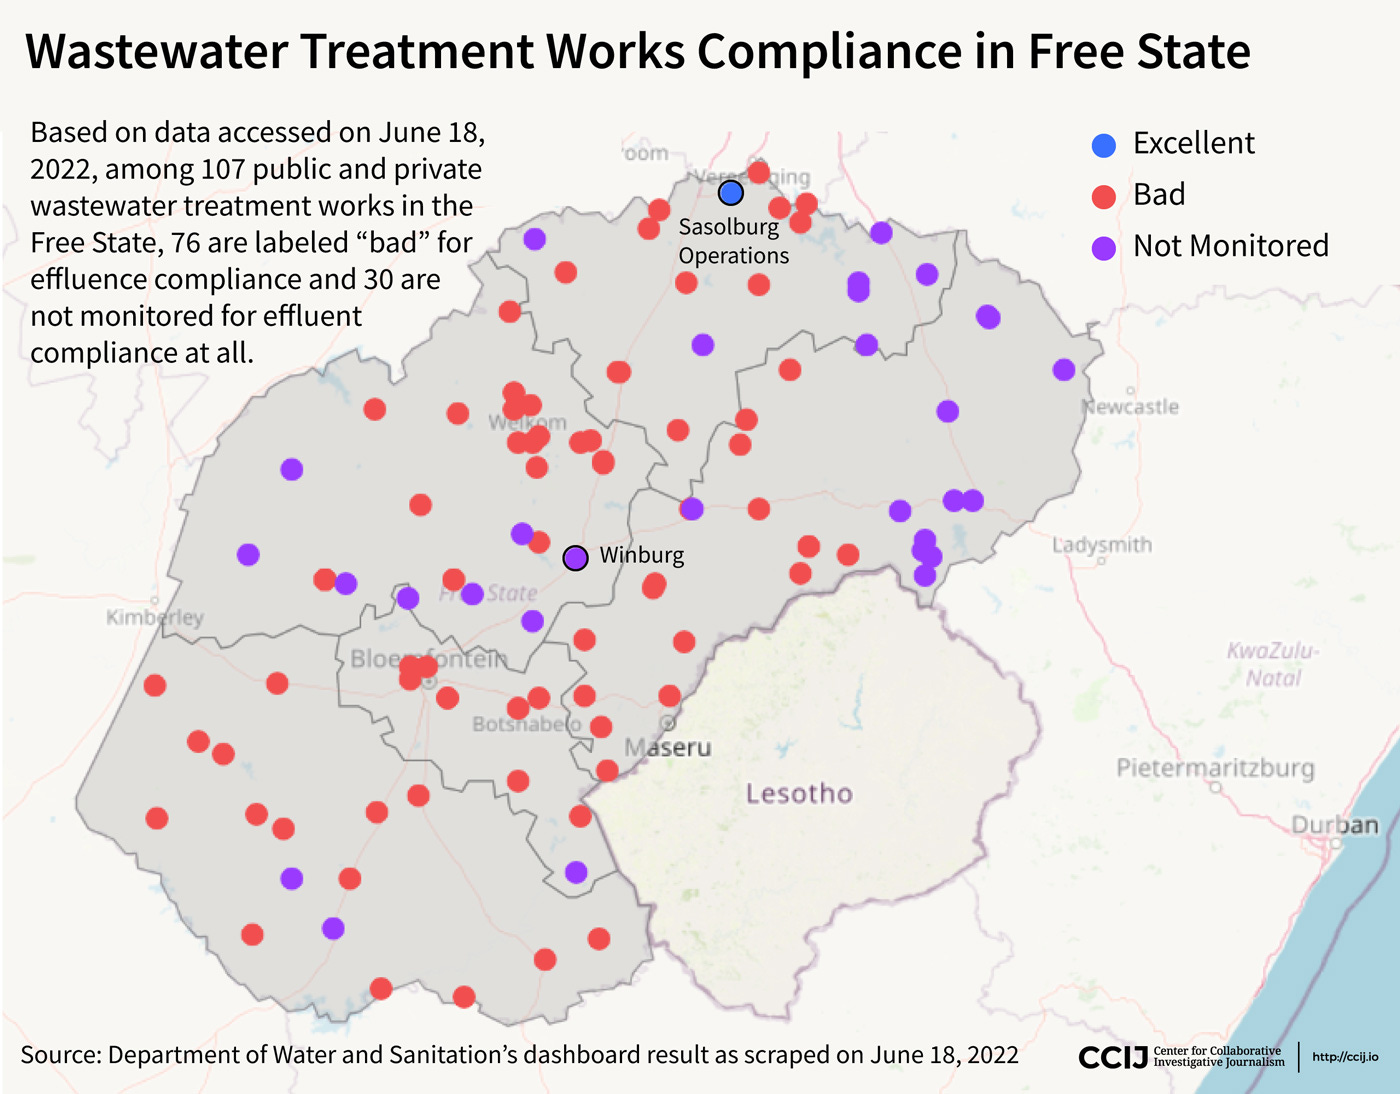 Wastewater treatment works compliance in Free State